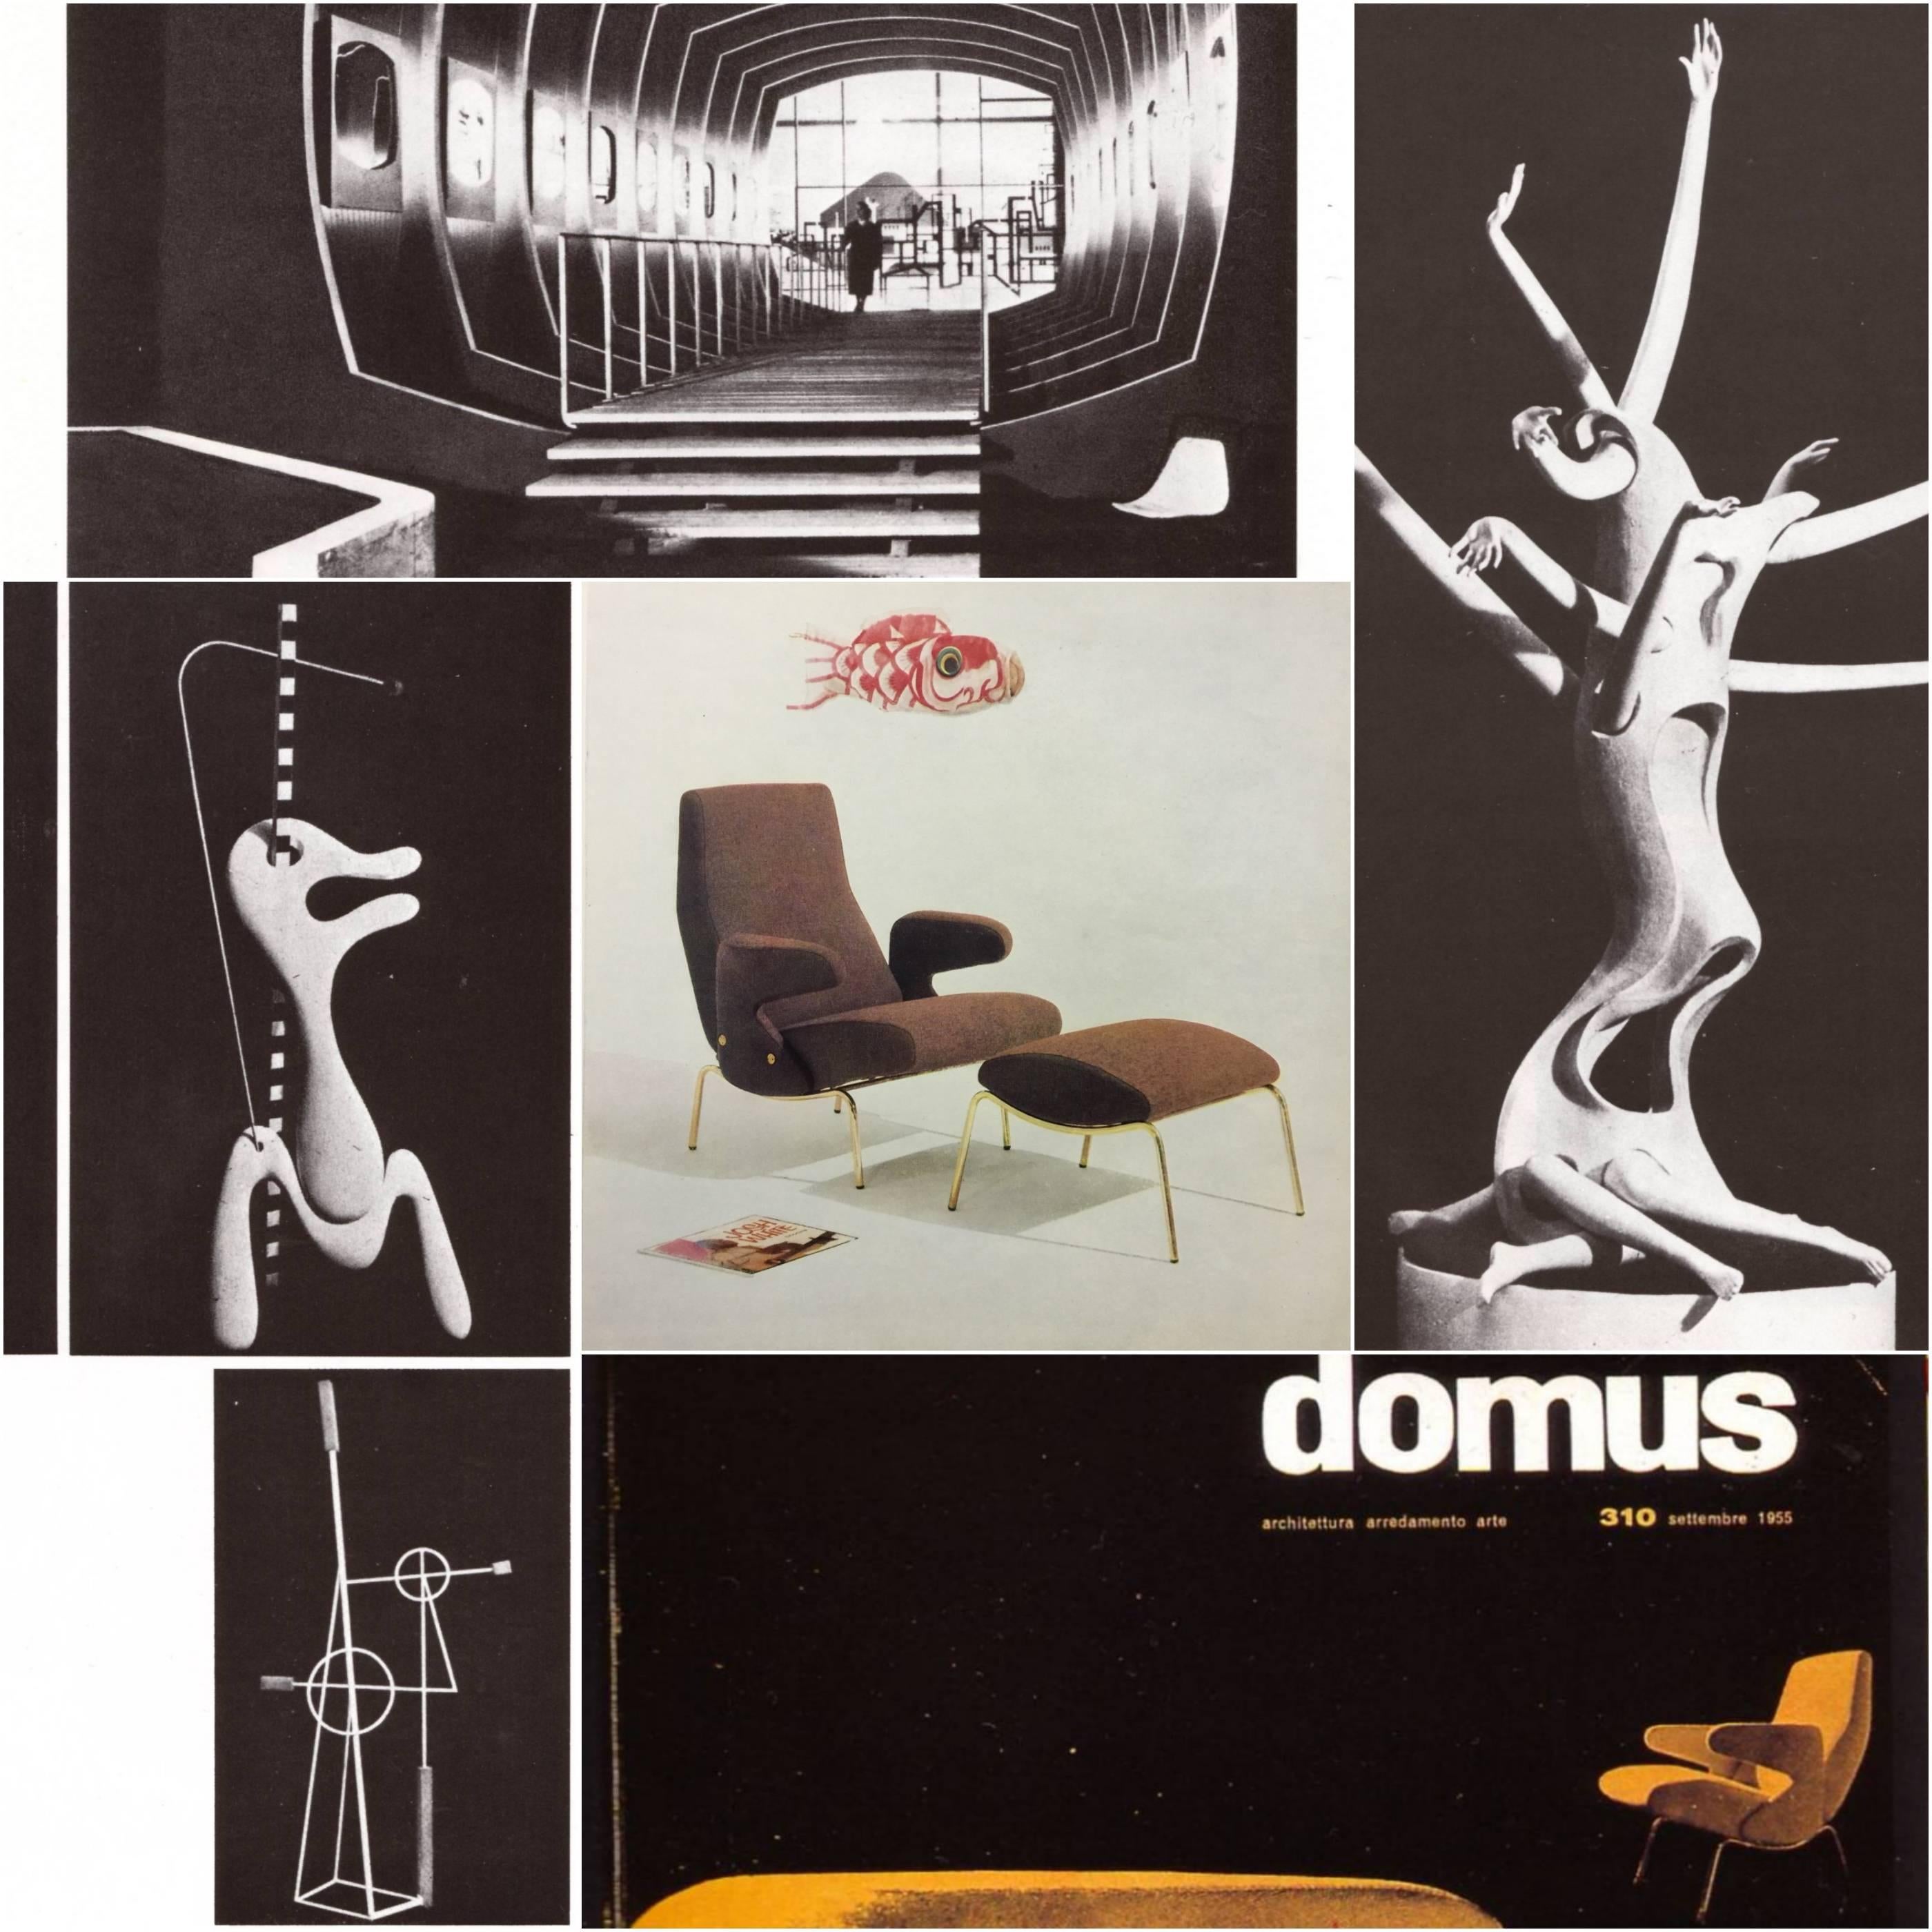 Mid-20th Century 'Delfino' Lounge Chair & Ottoman by Carboni for Arflex, 1954, Very Early Examples